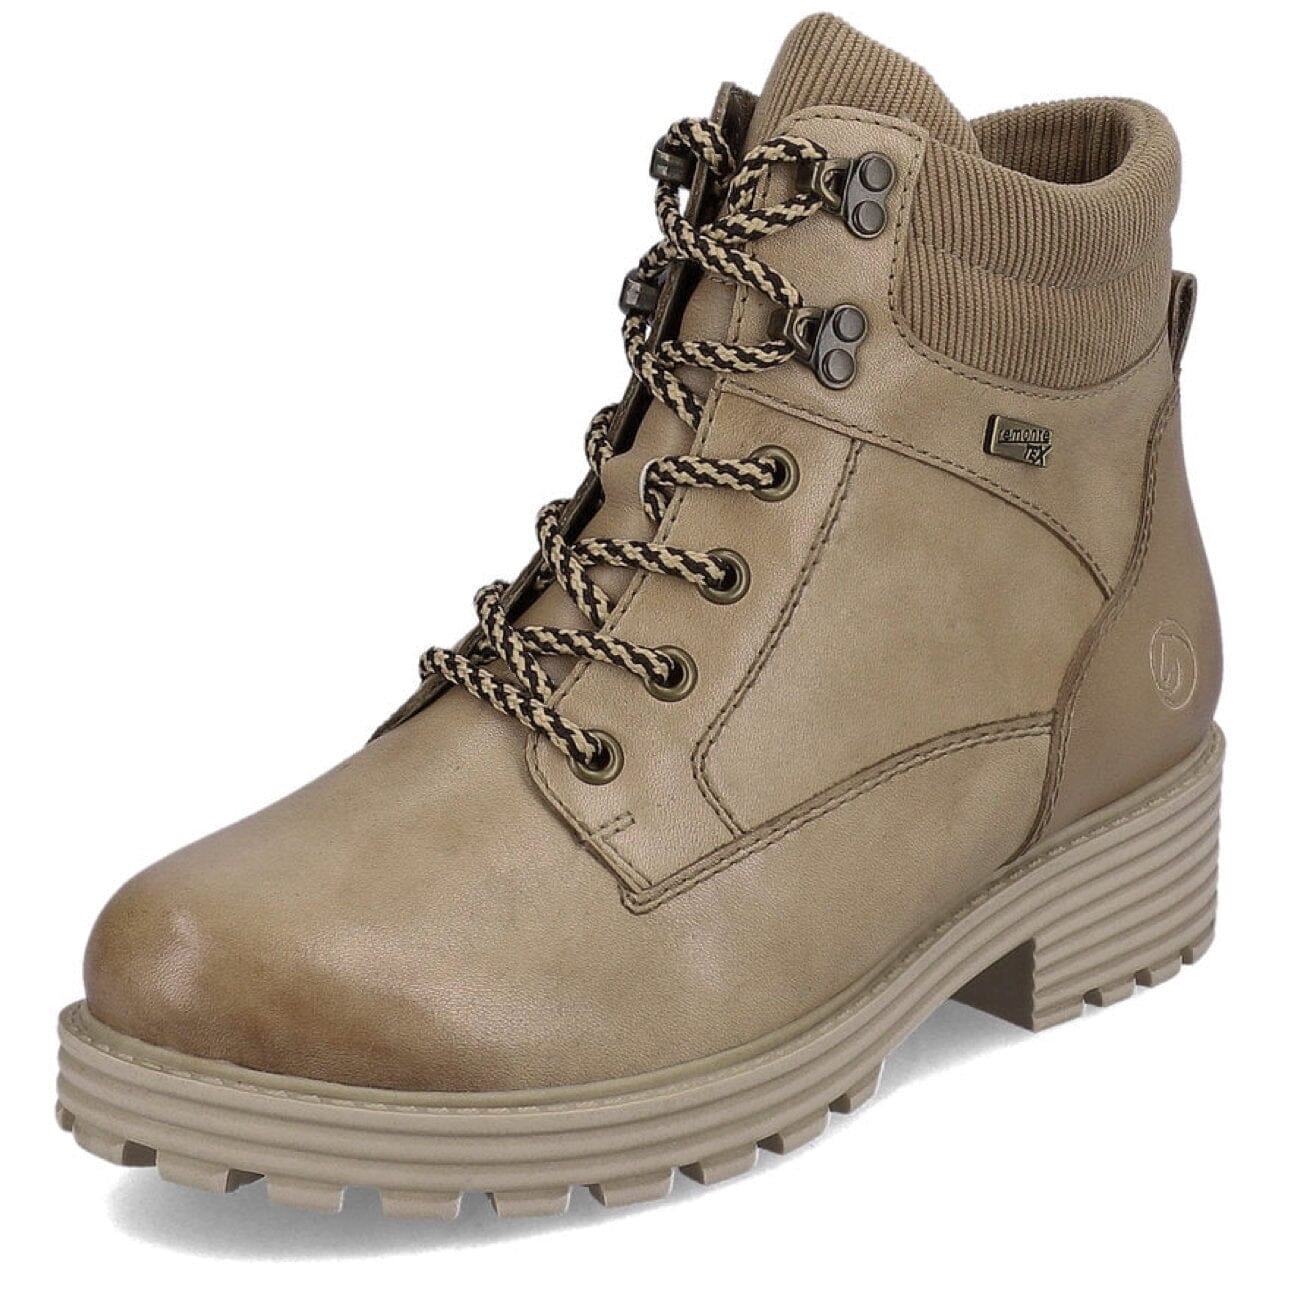 Remonte, DOW75-20, Boot, Leather, Taupe-Mushroom Boots Remonte Taupe-Mushroom 37 